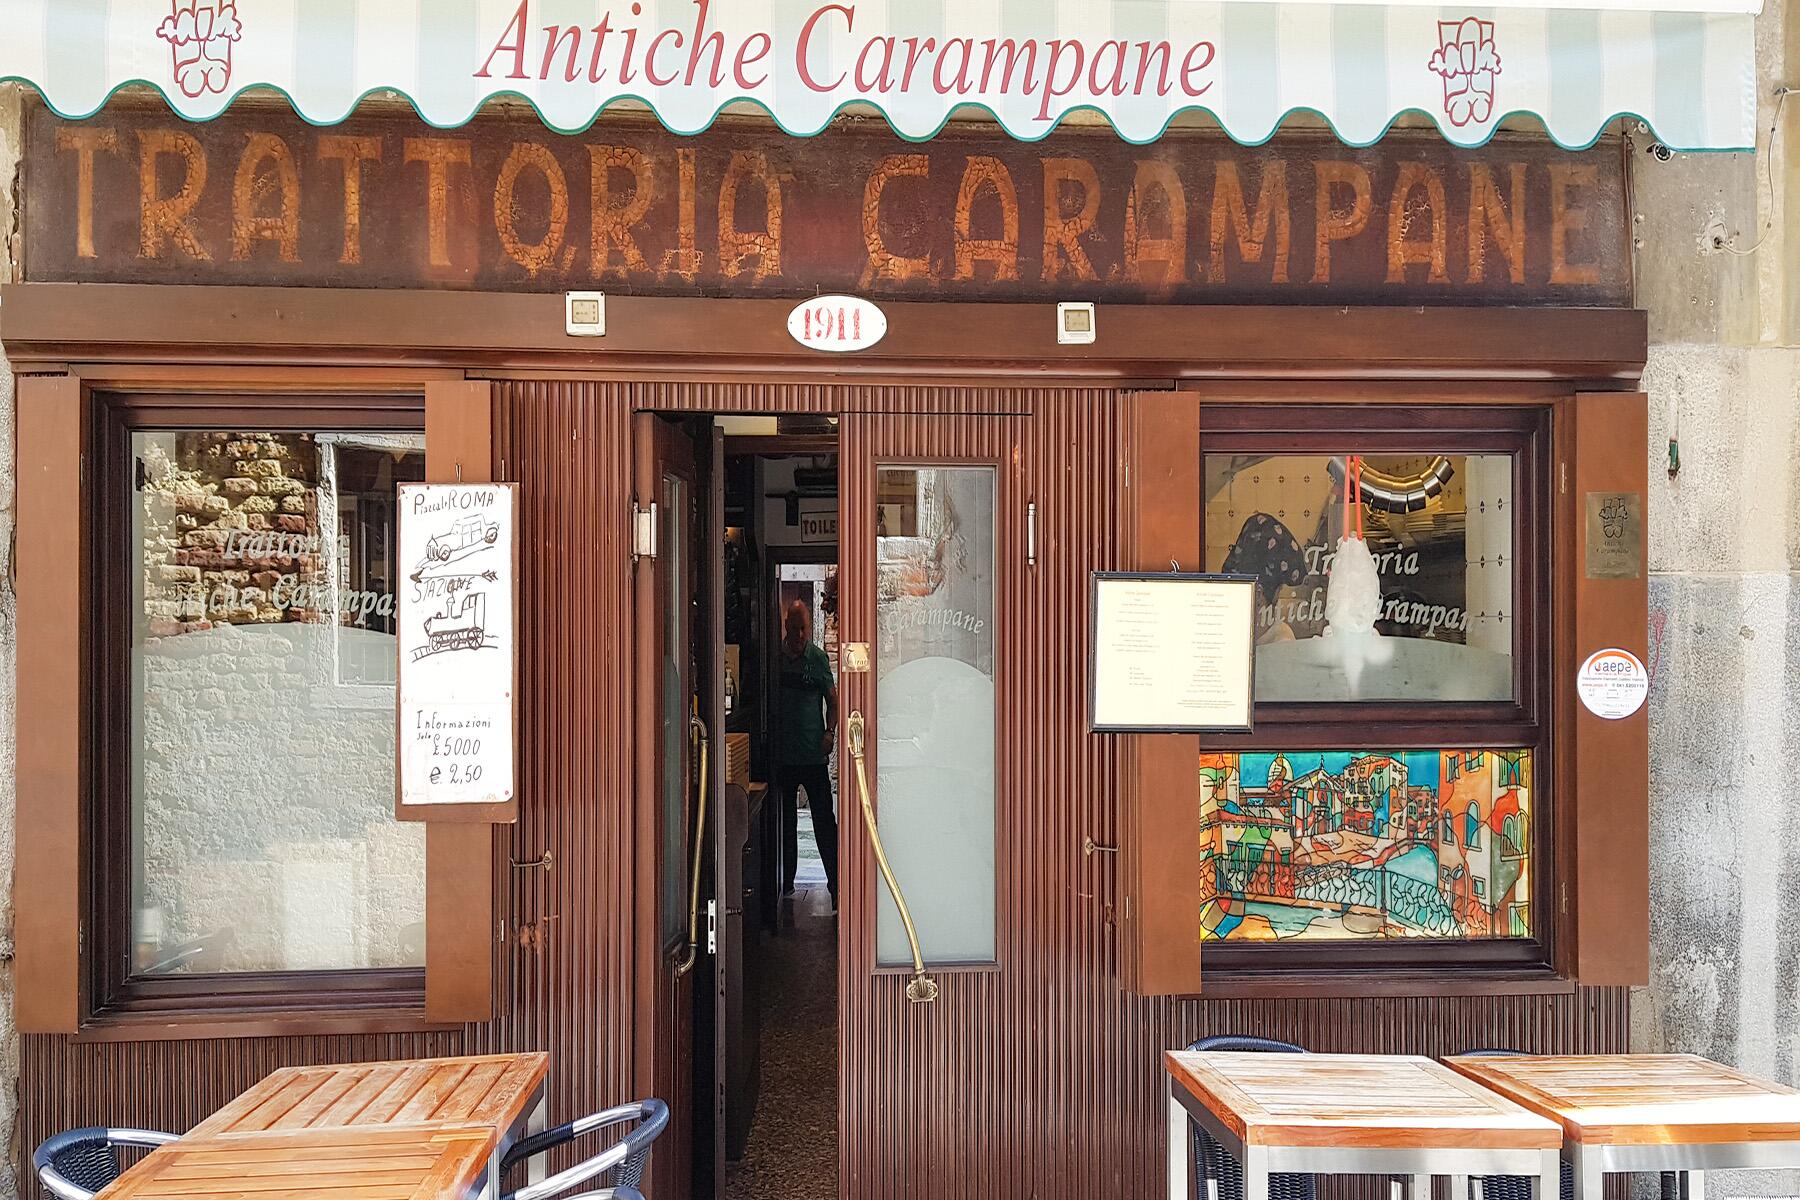 <a href='https://www.fodors.com/world/europe/italy/venice/experiences/news/photos/the-best-restaurants-in-venice-italy#'>From &quot;The 15 Best Restaurants in Venice in 2024: Antiche Carampane&quot;</a>